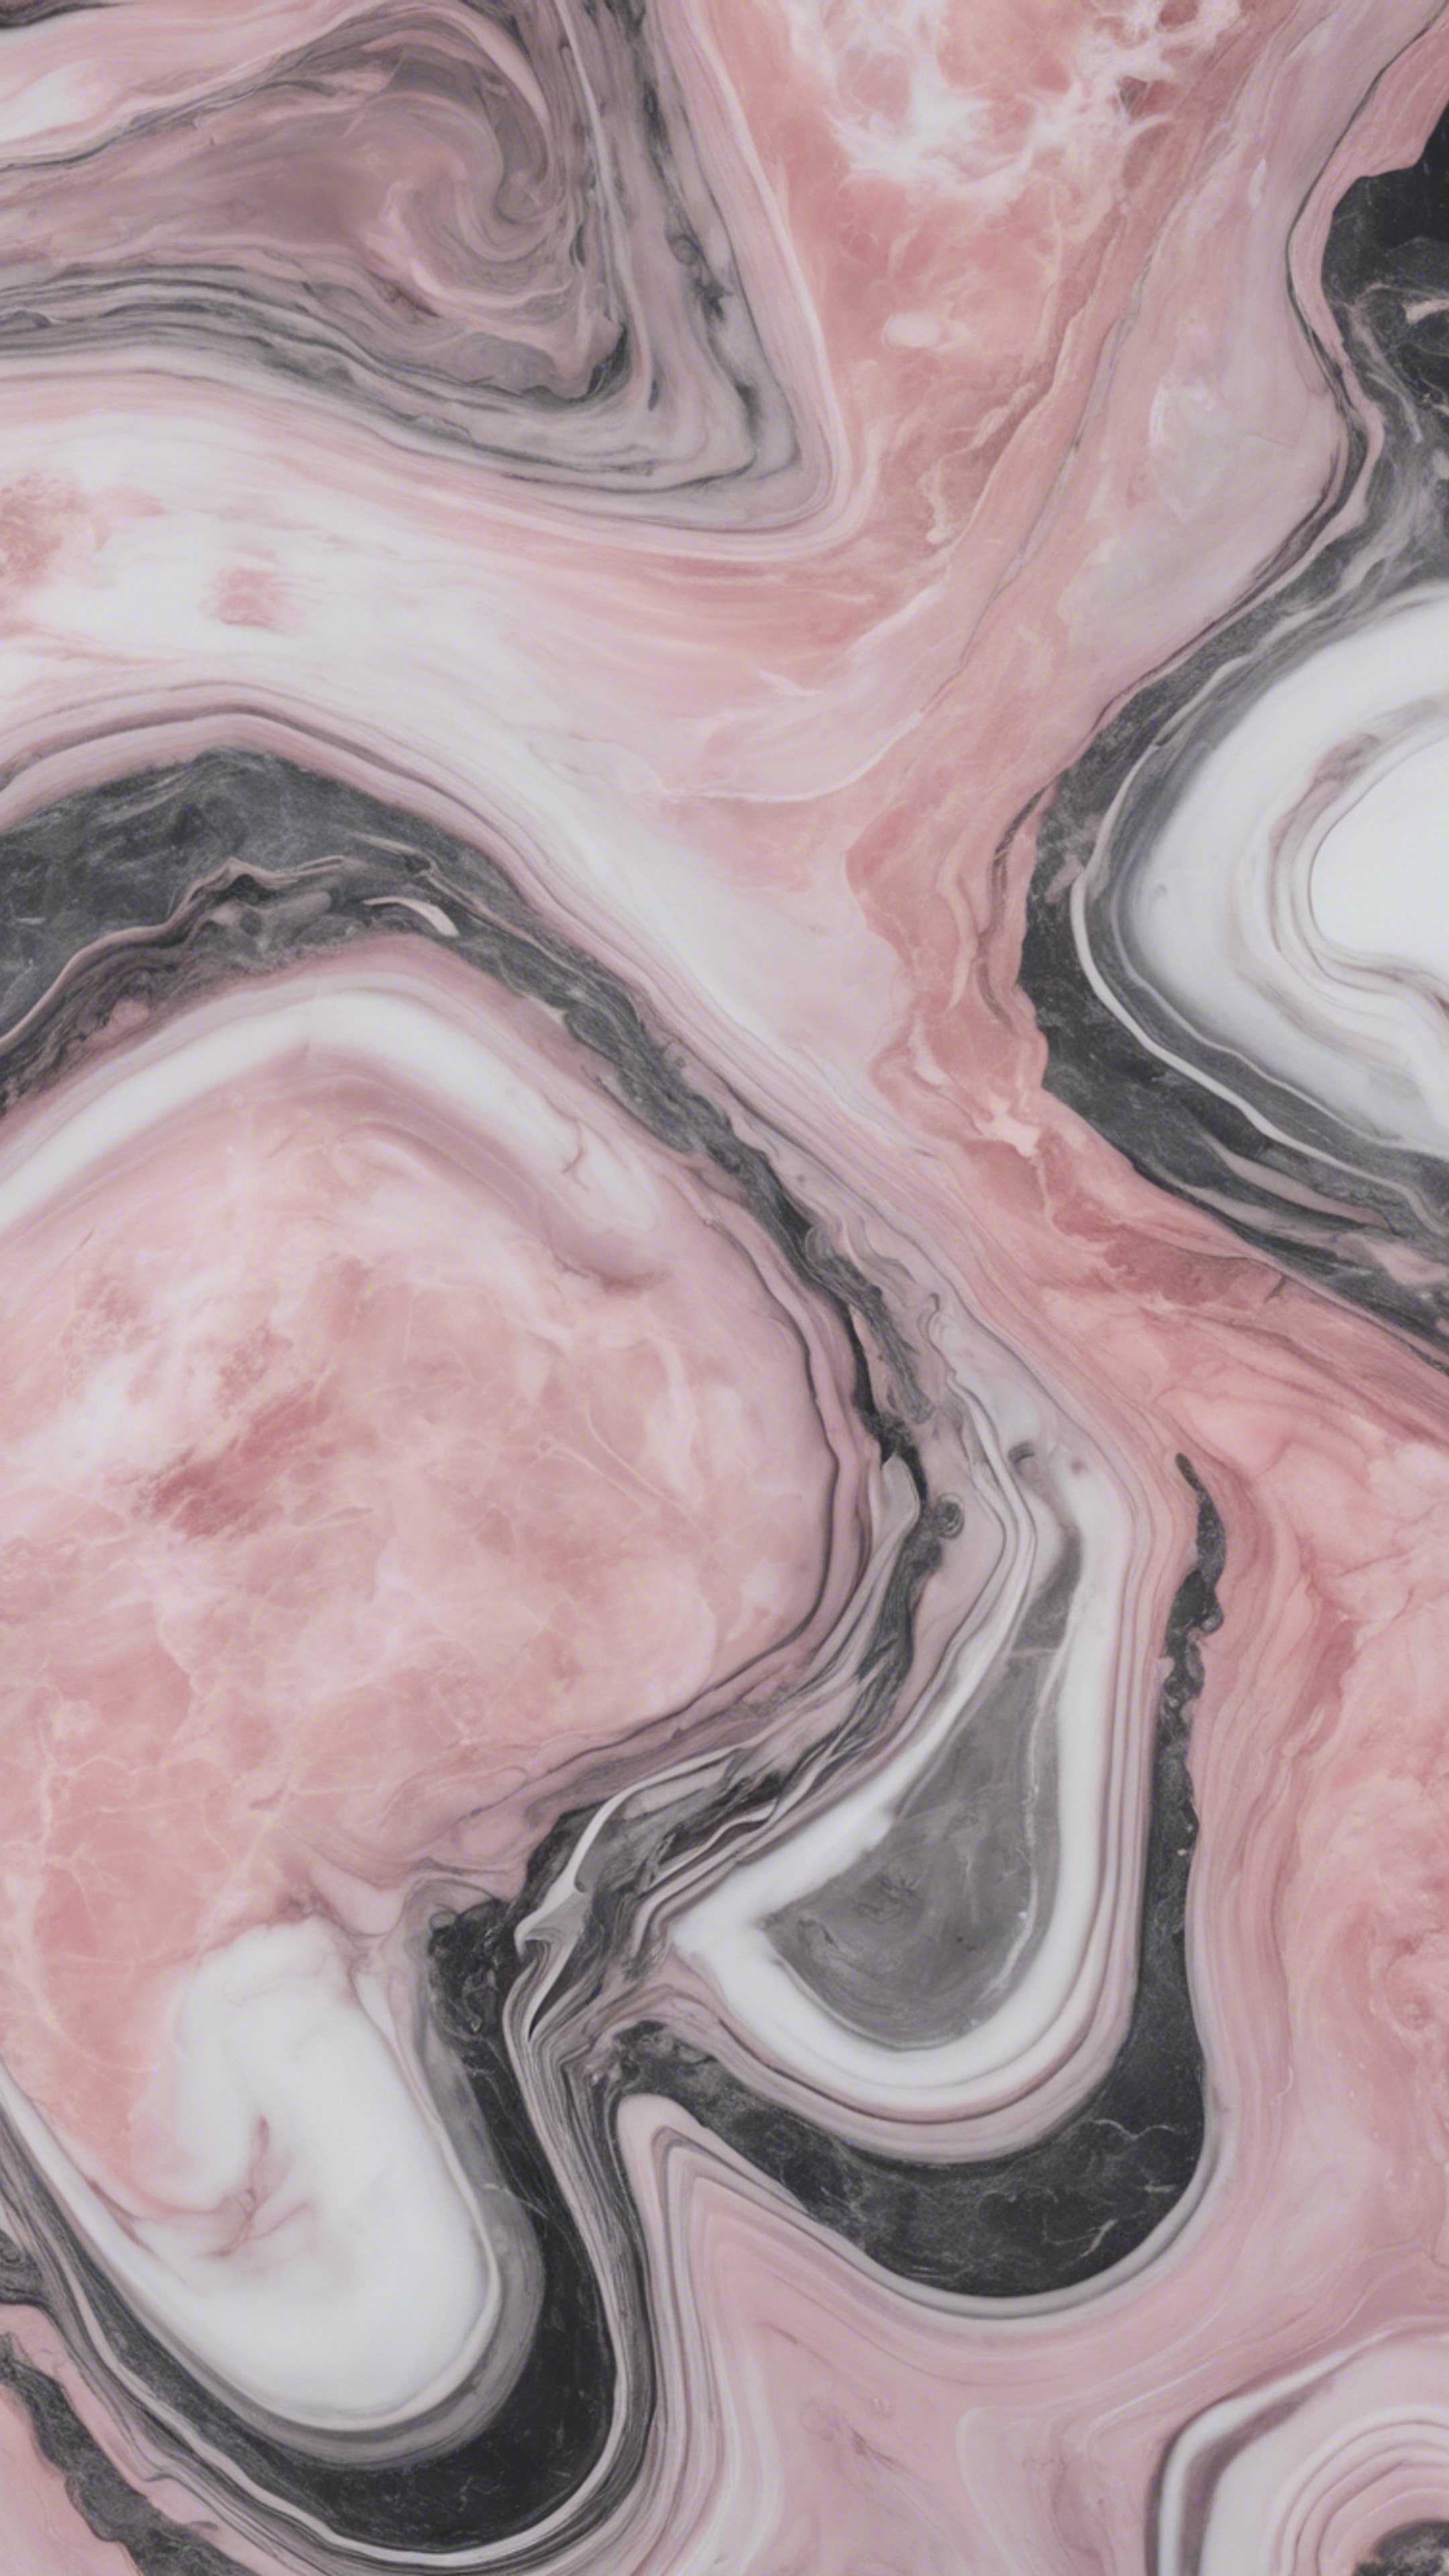 A swirling pattern of pink, white, and charcoal grey characteristic of polished pink marble. Behang[fb90daec103040ffbaff]